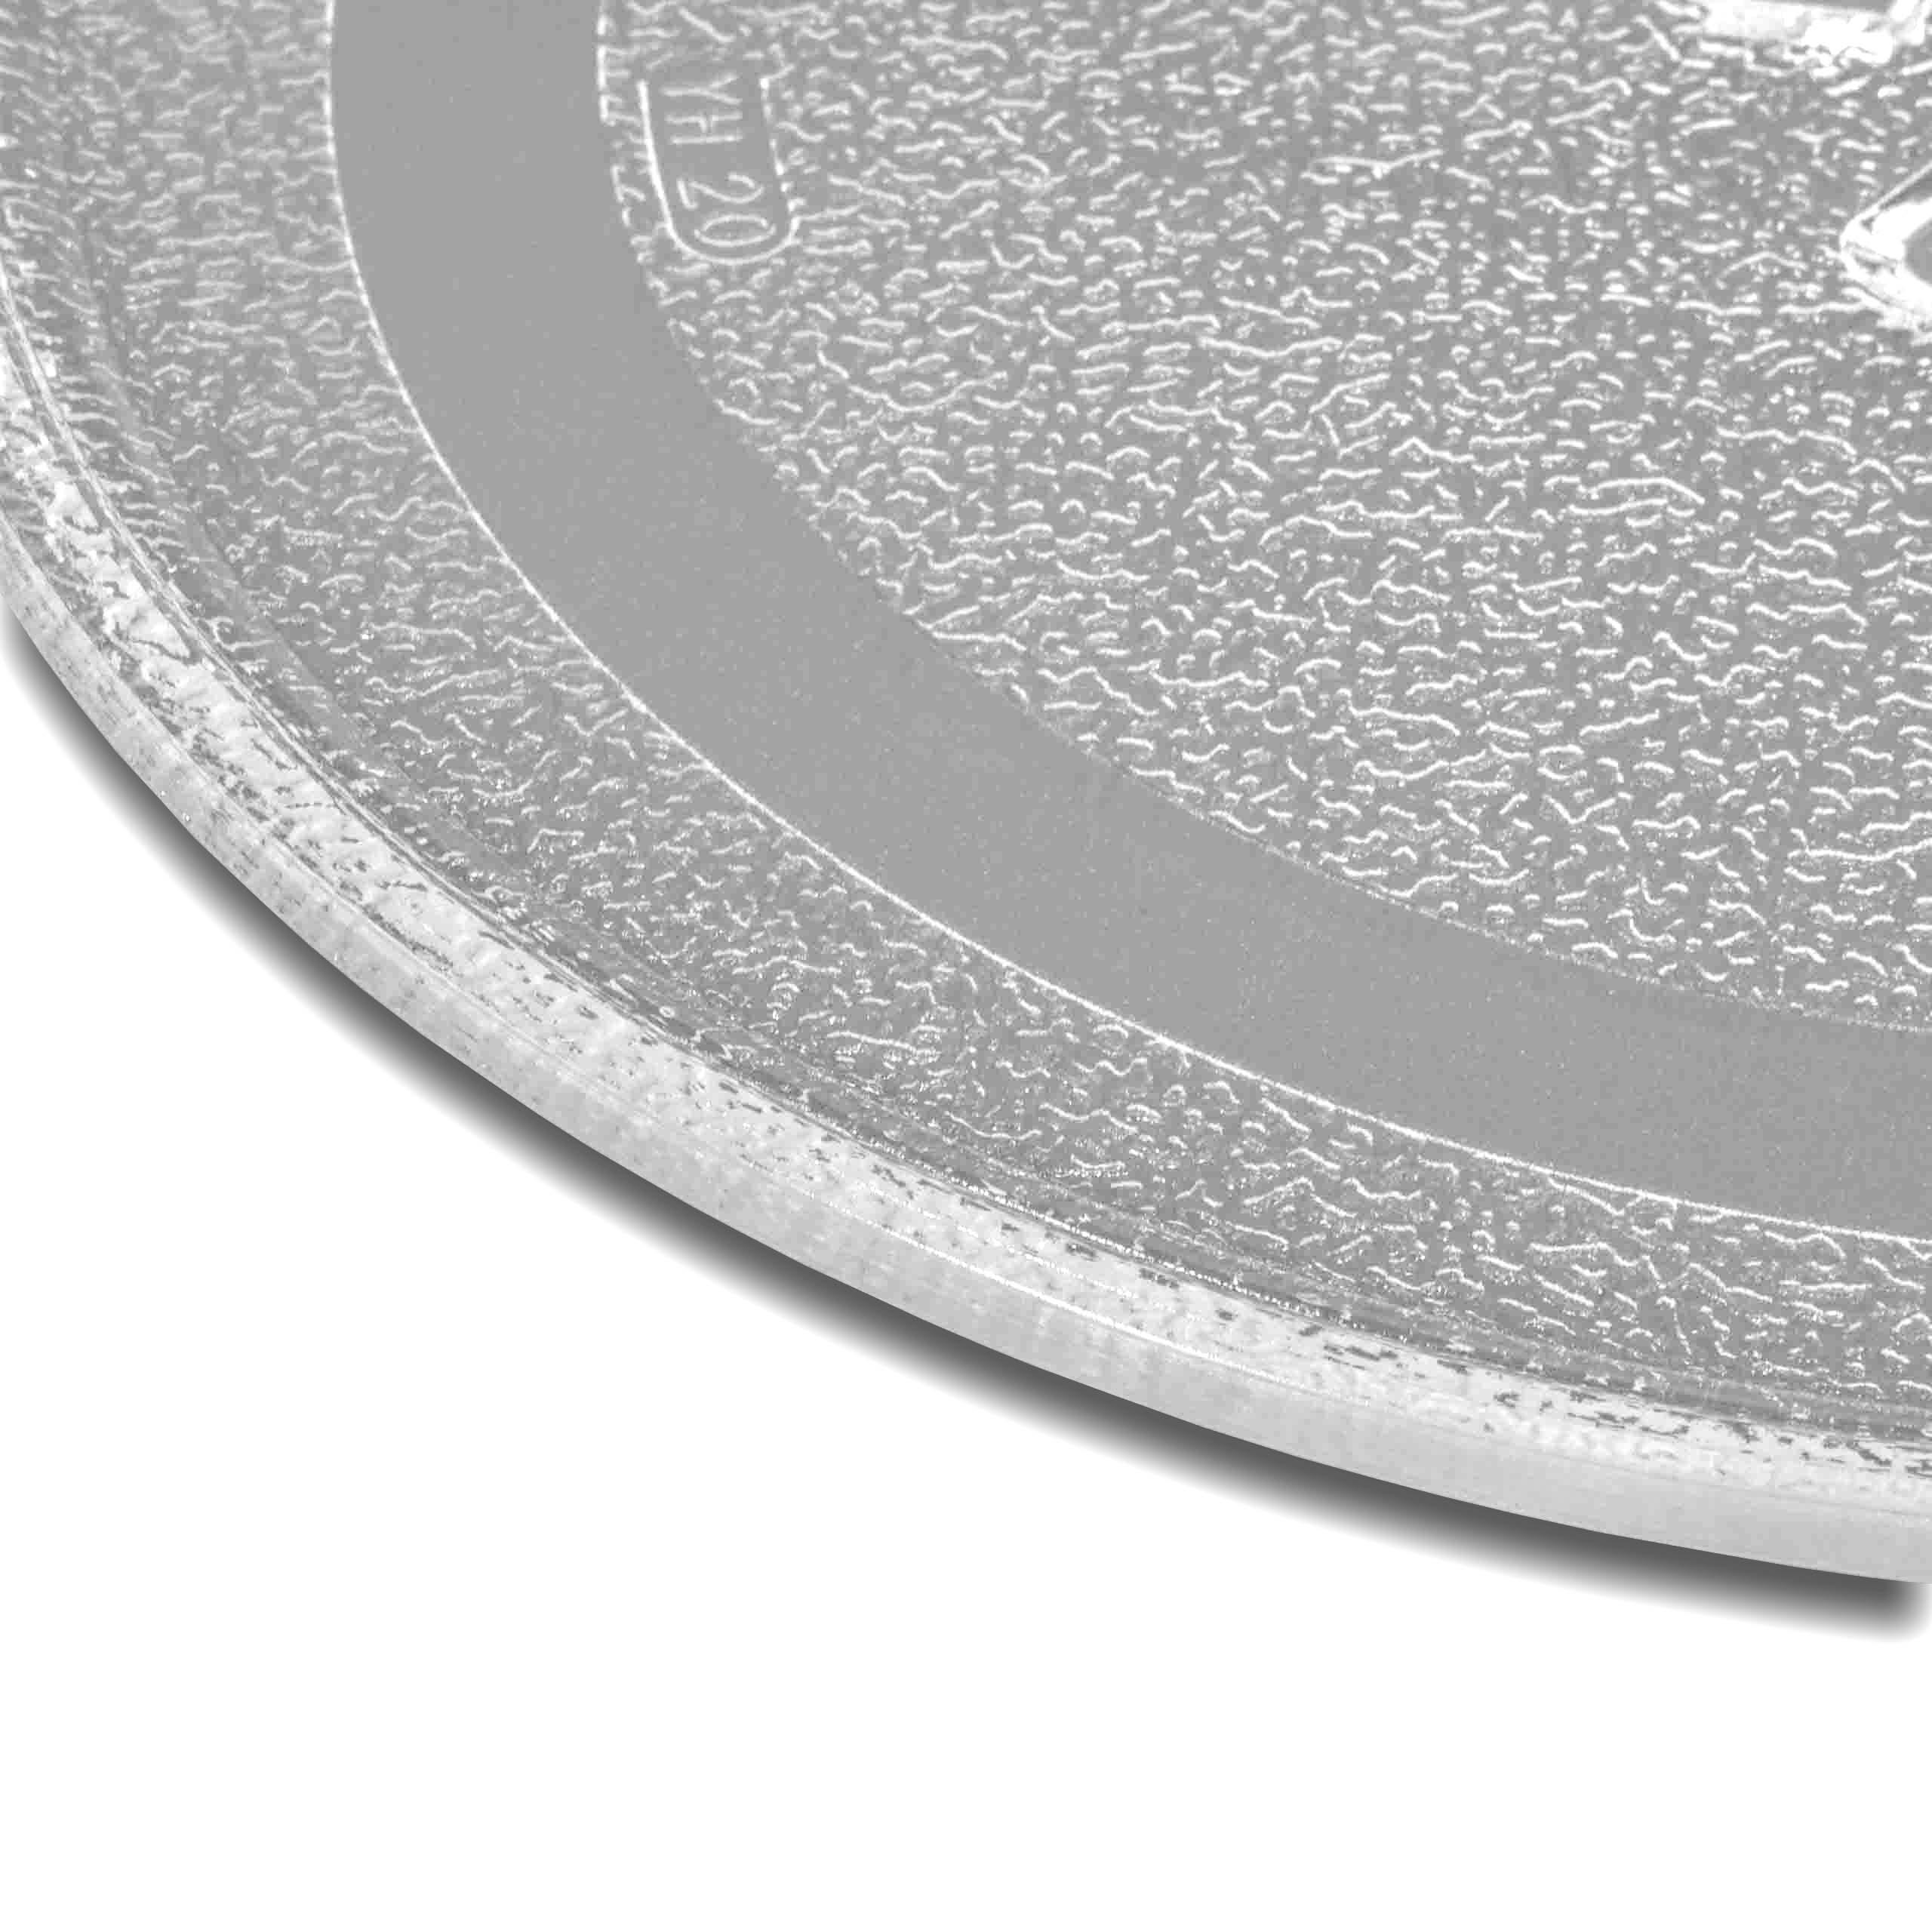 glass microwave plate, rotary plate 24.5cm replaces Panasonic Z06016D00XN for Silvercrest microwave etc